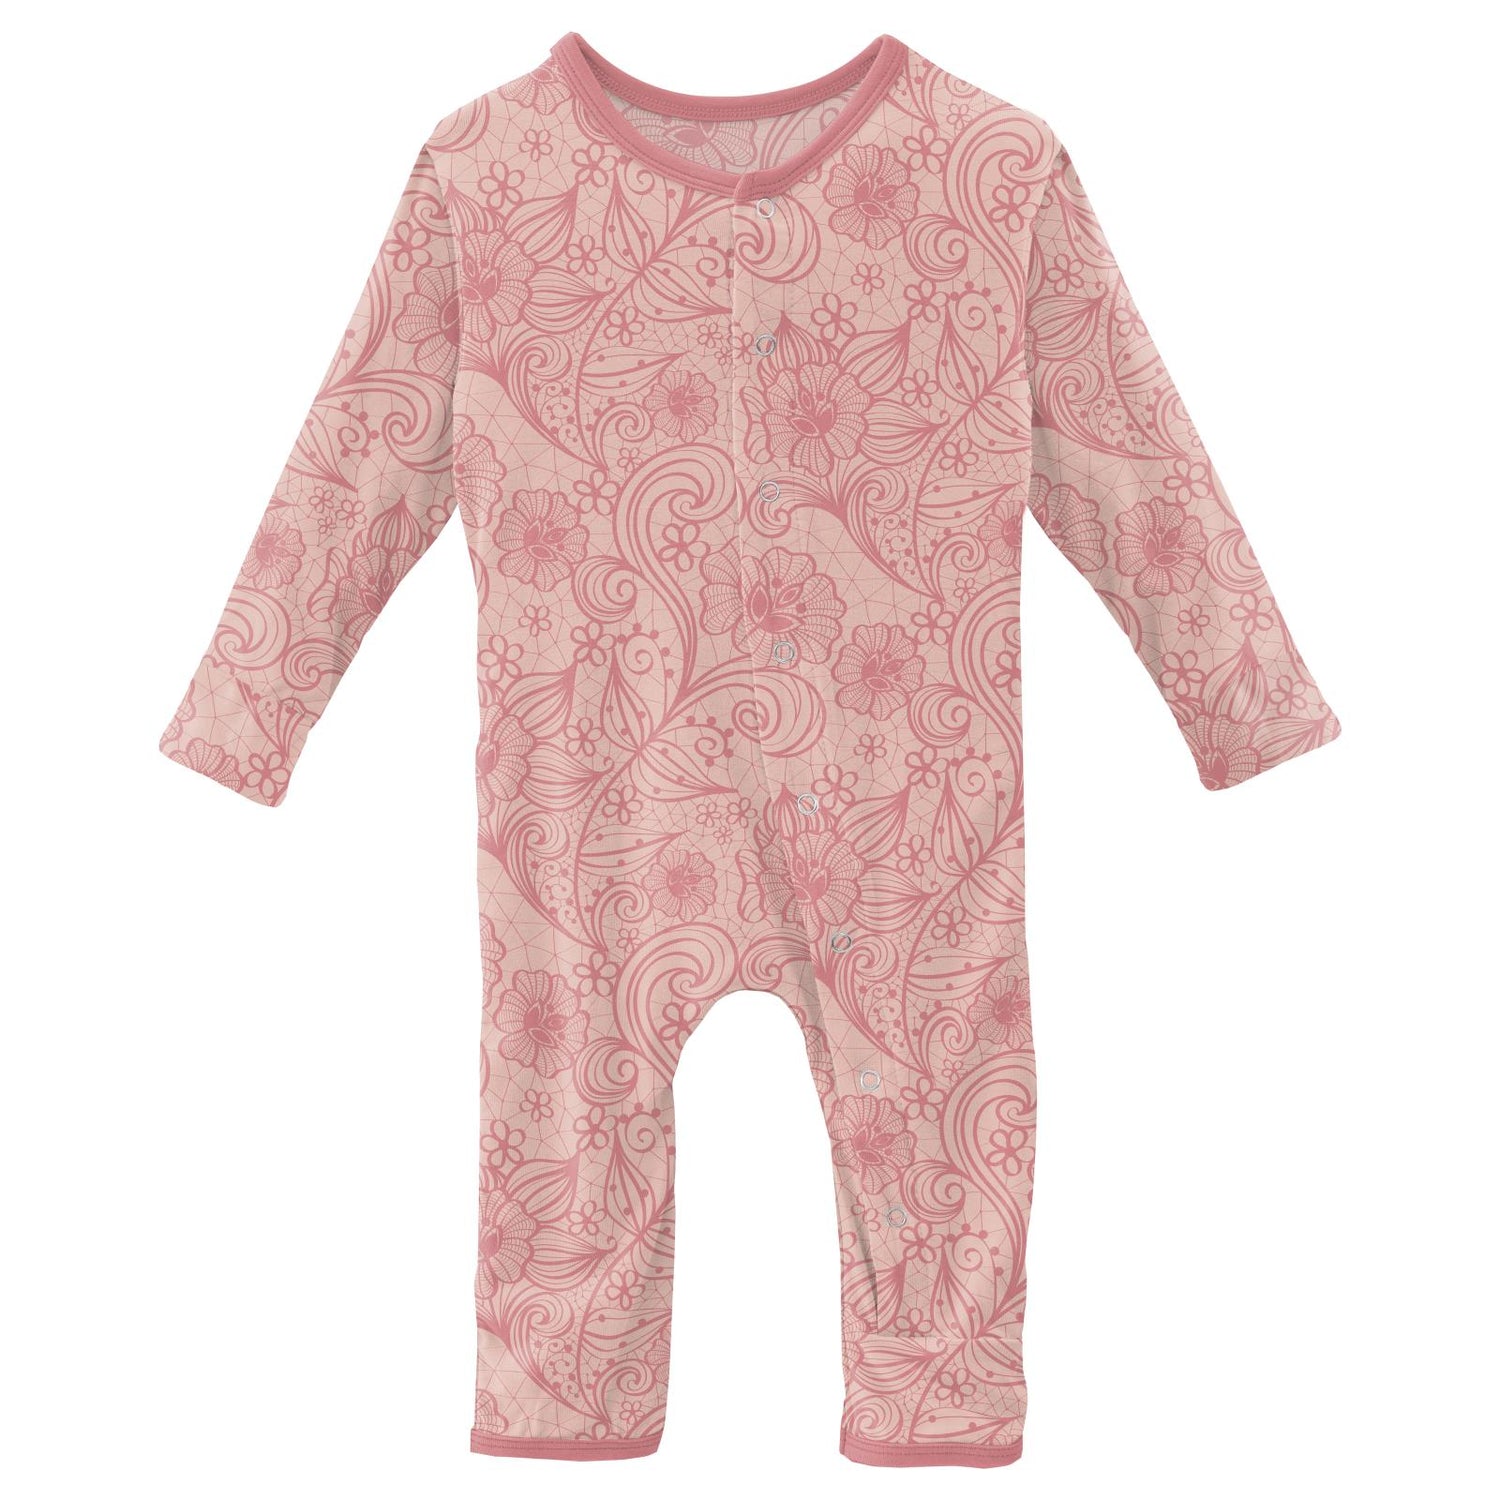 Print Coverall with Snaps in Peach Blossom Lace